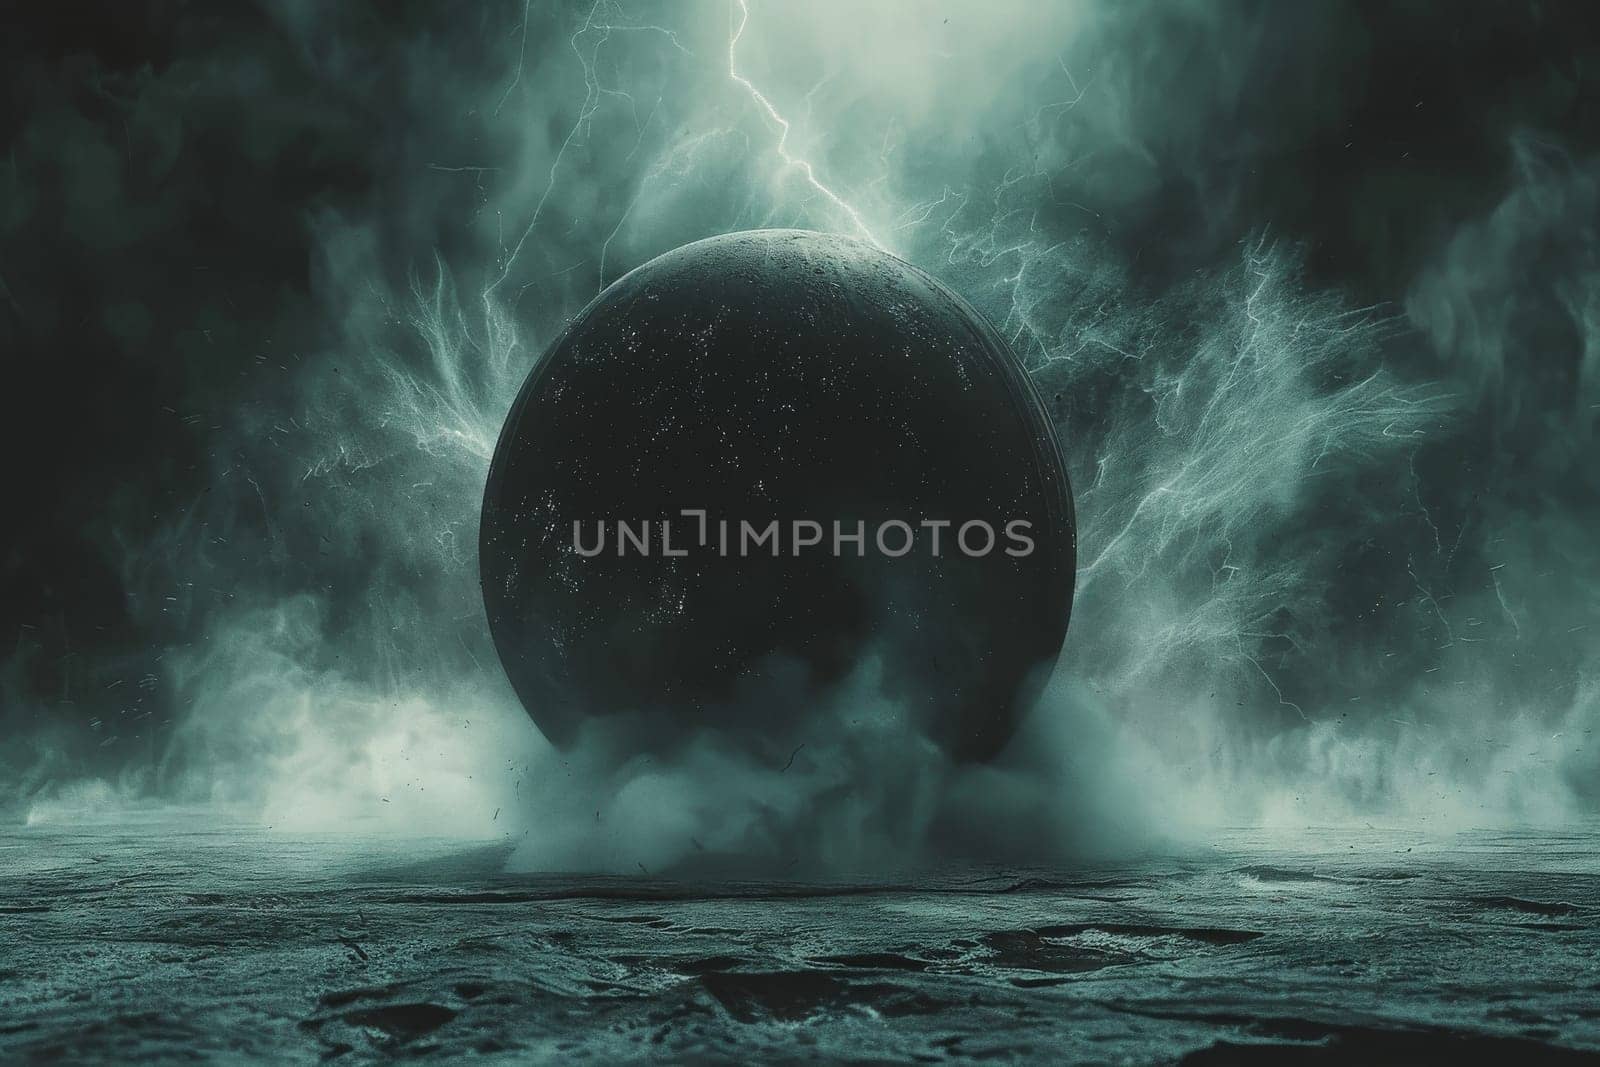 A large black sphere is surrounded by a cloud of smoke and a bolt of lightning. The scene is dark and ominous, with a sense of danger and chaos